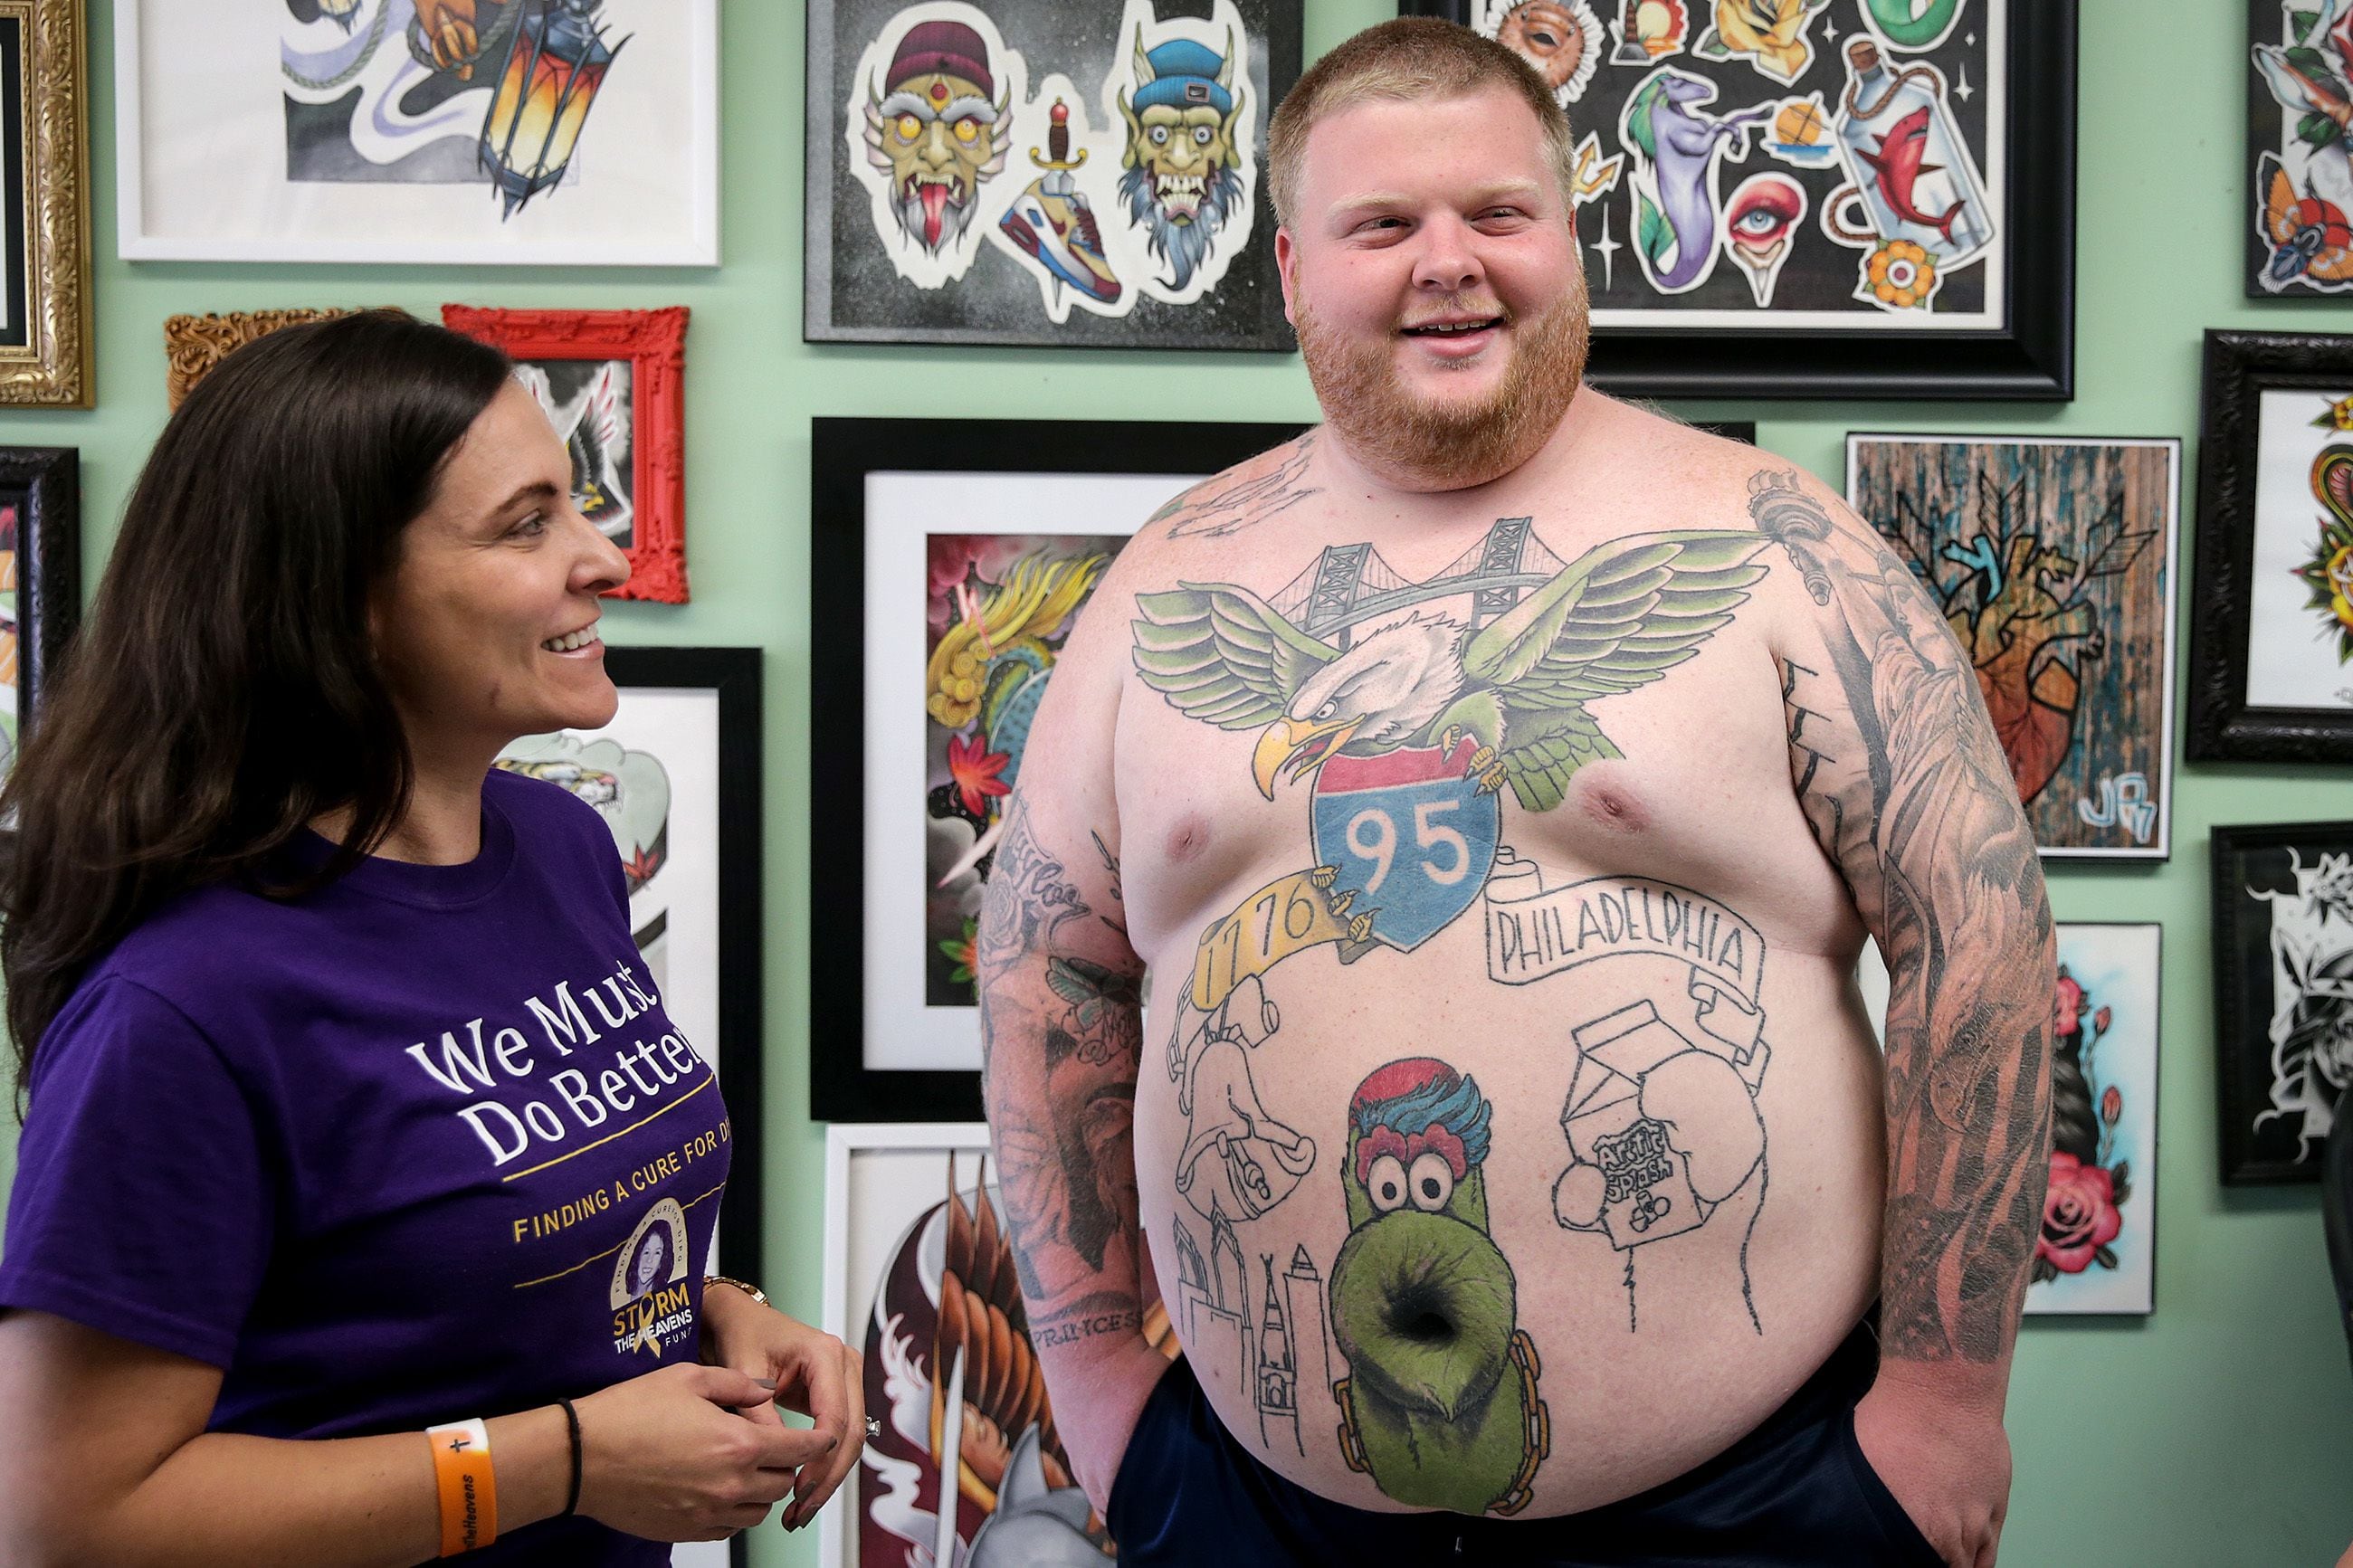 How that ridiculous Phanatic tattoo is raising money to fight childhood  cancer | Mike Newall